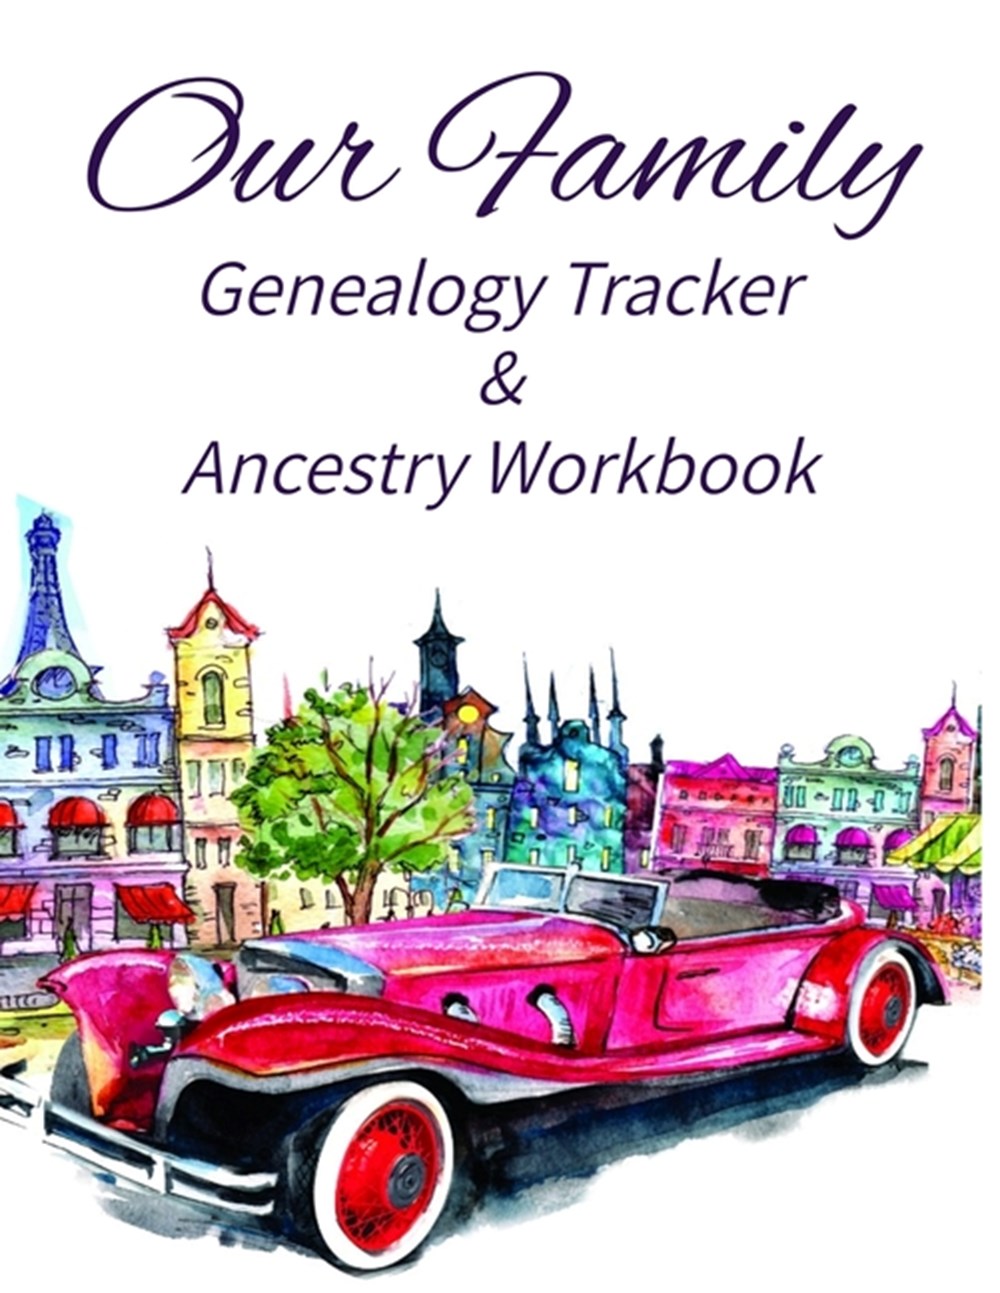 Our Family Genealogy Tracker & Ancestry Workbook: Research Family Heritage and Track Ancestry in thi